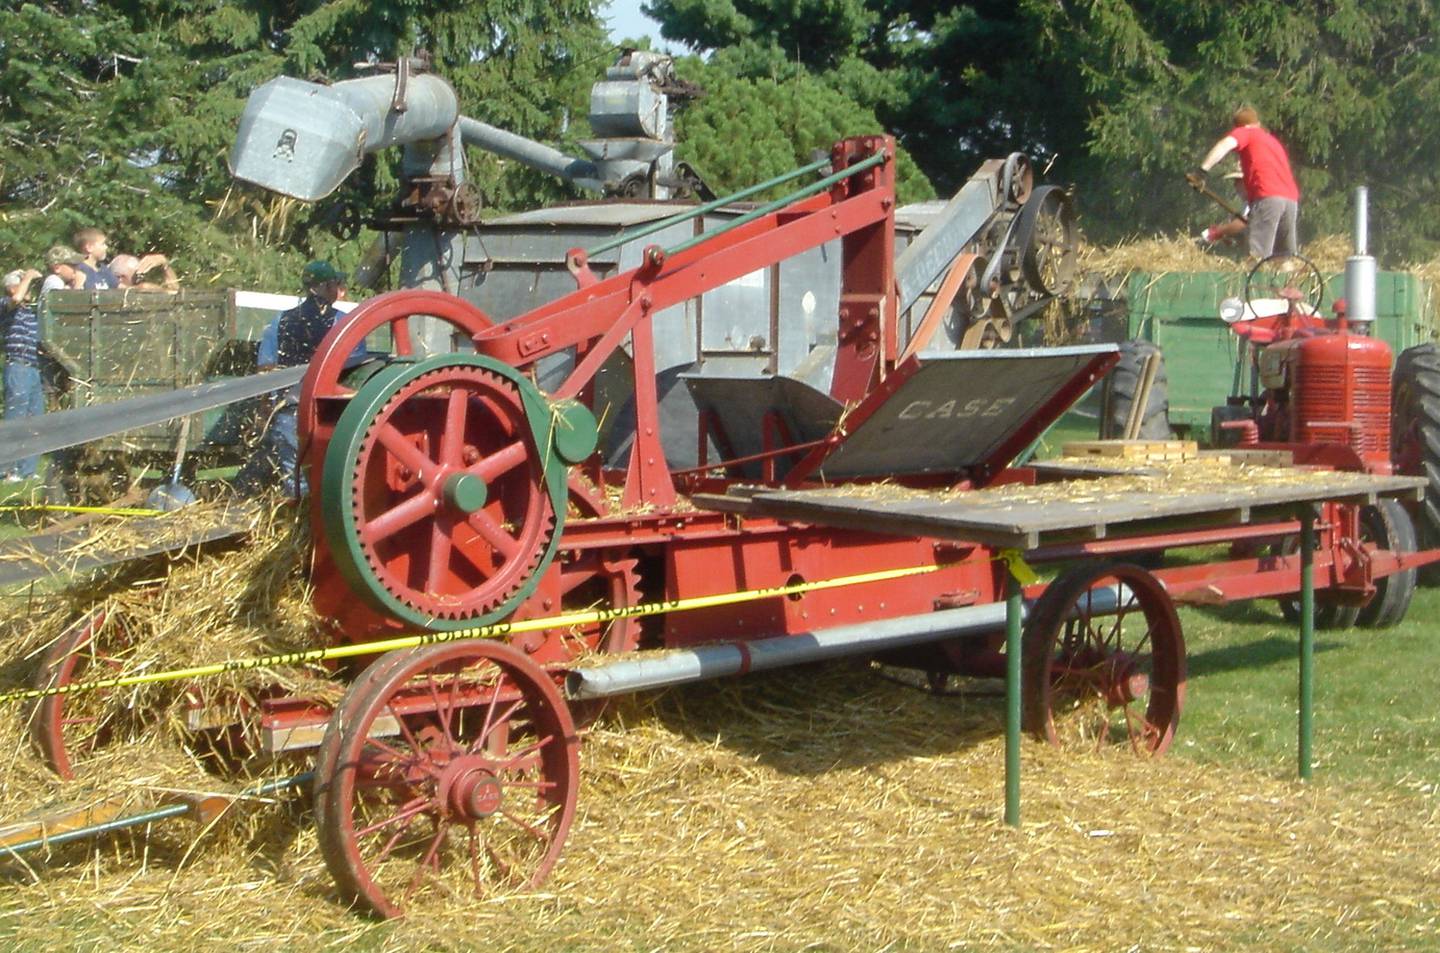 A corn husker/shredder that will be on display at the Farm Heritage Festival